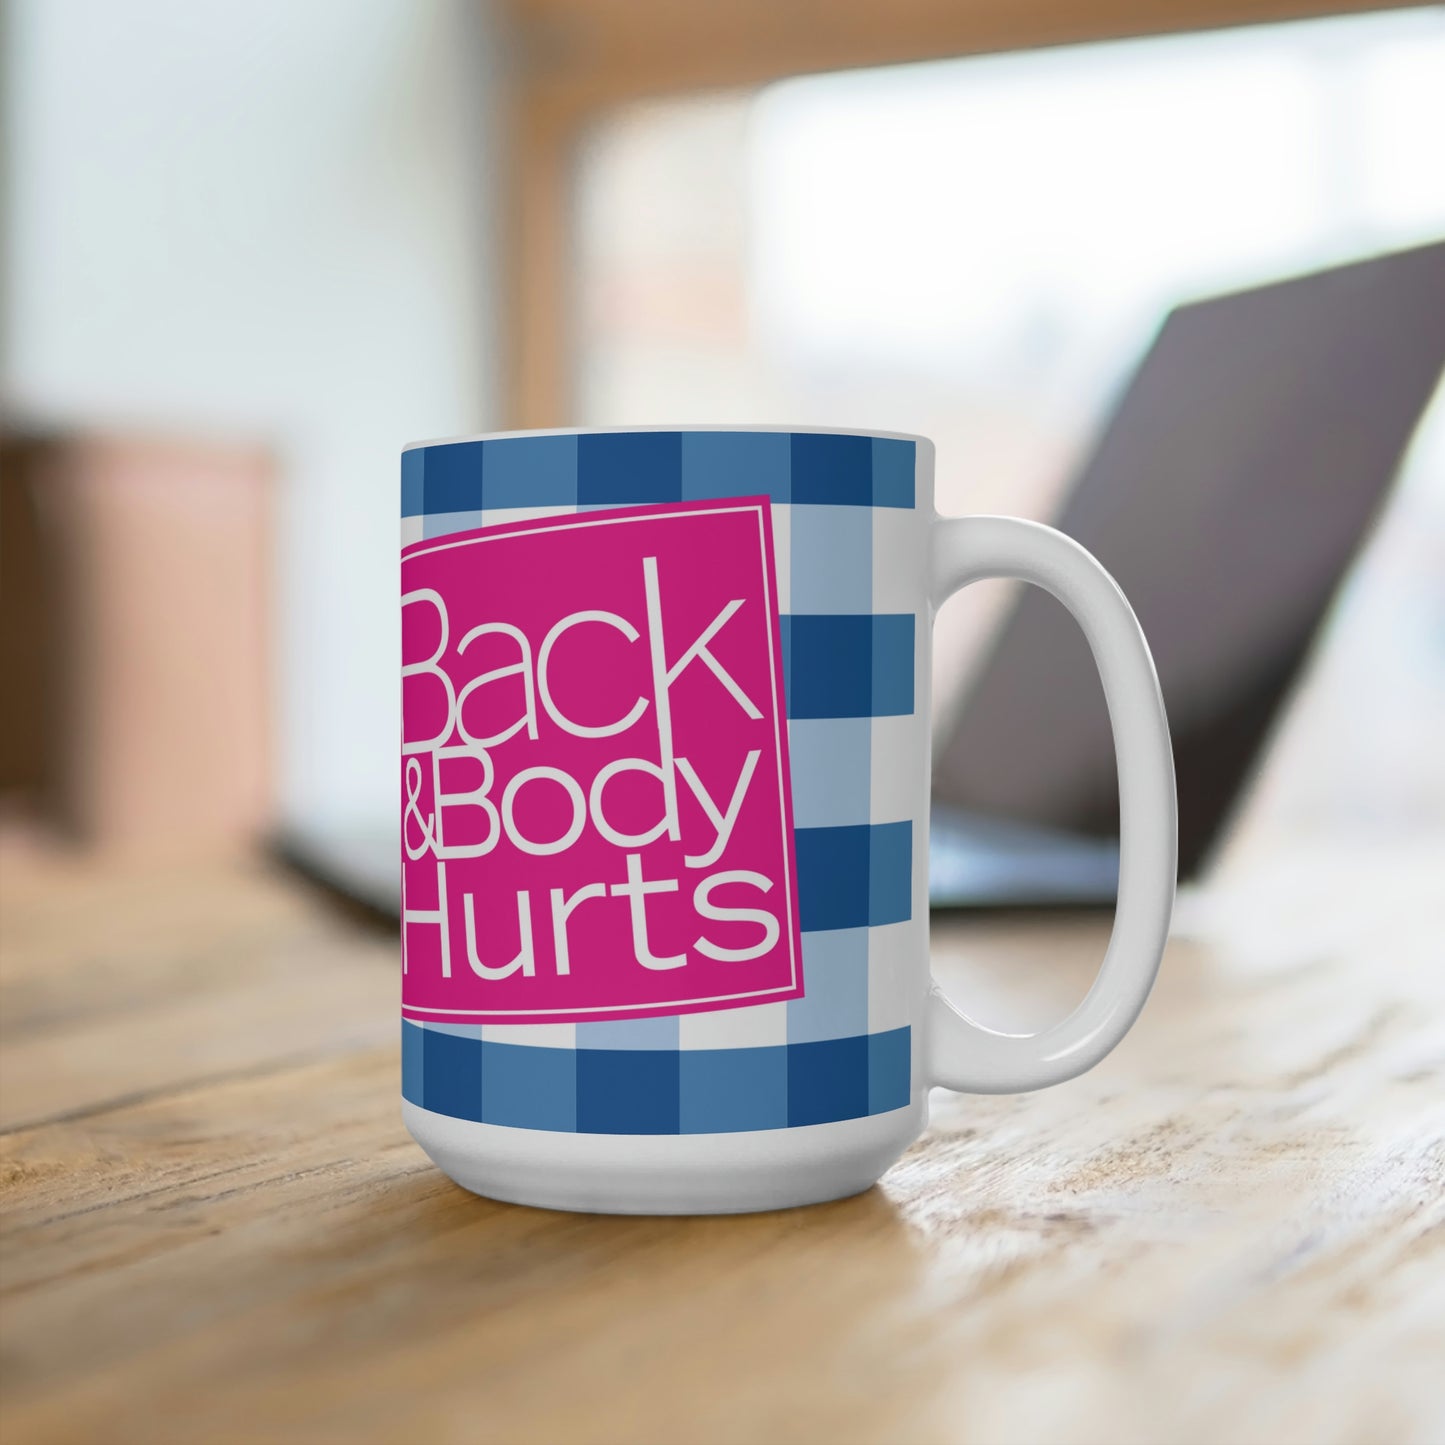 Back & Body Hurts Mug - Perfect gift for everyone Gifts for Mother's Day, Friends, Grandparents, Teachers, Employee funny mug